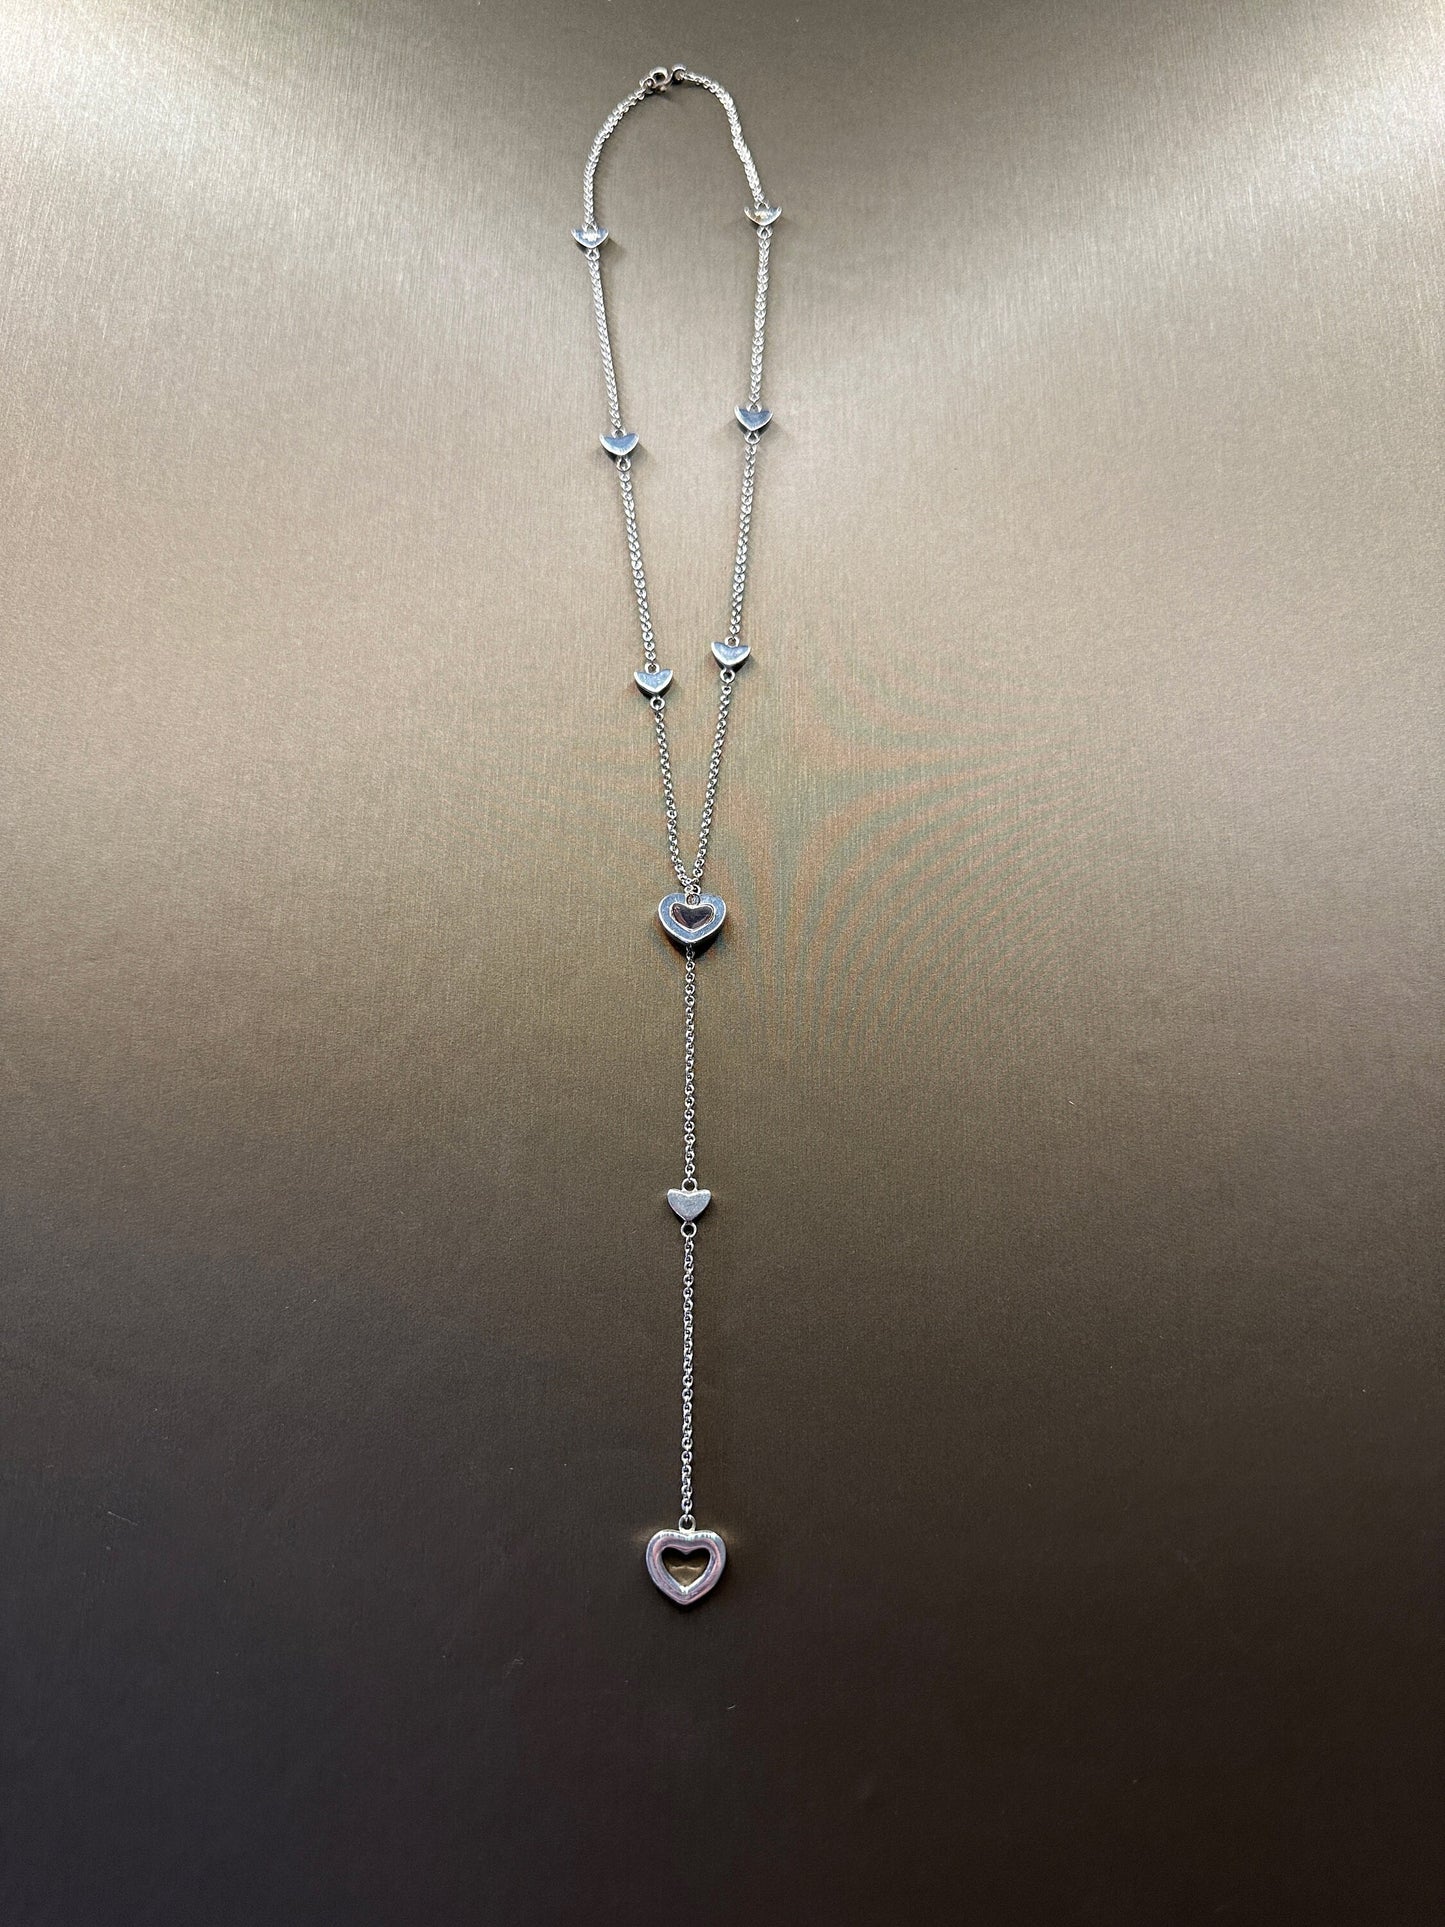 TIFFANY VINTAGE 100% Authentic Genuine Heart Necklace, 925 Silver, 1990's, Great Condition